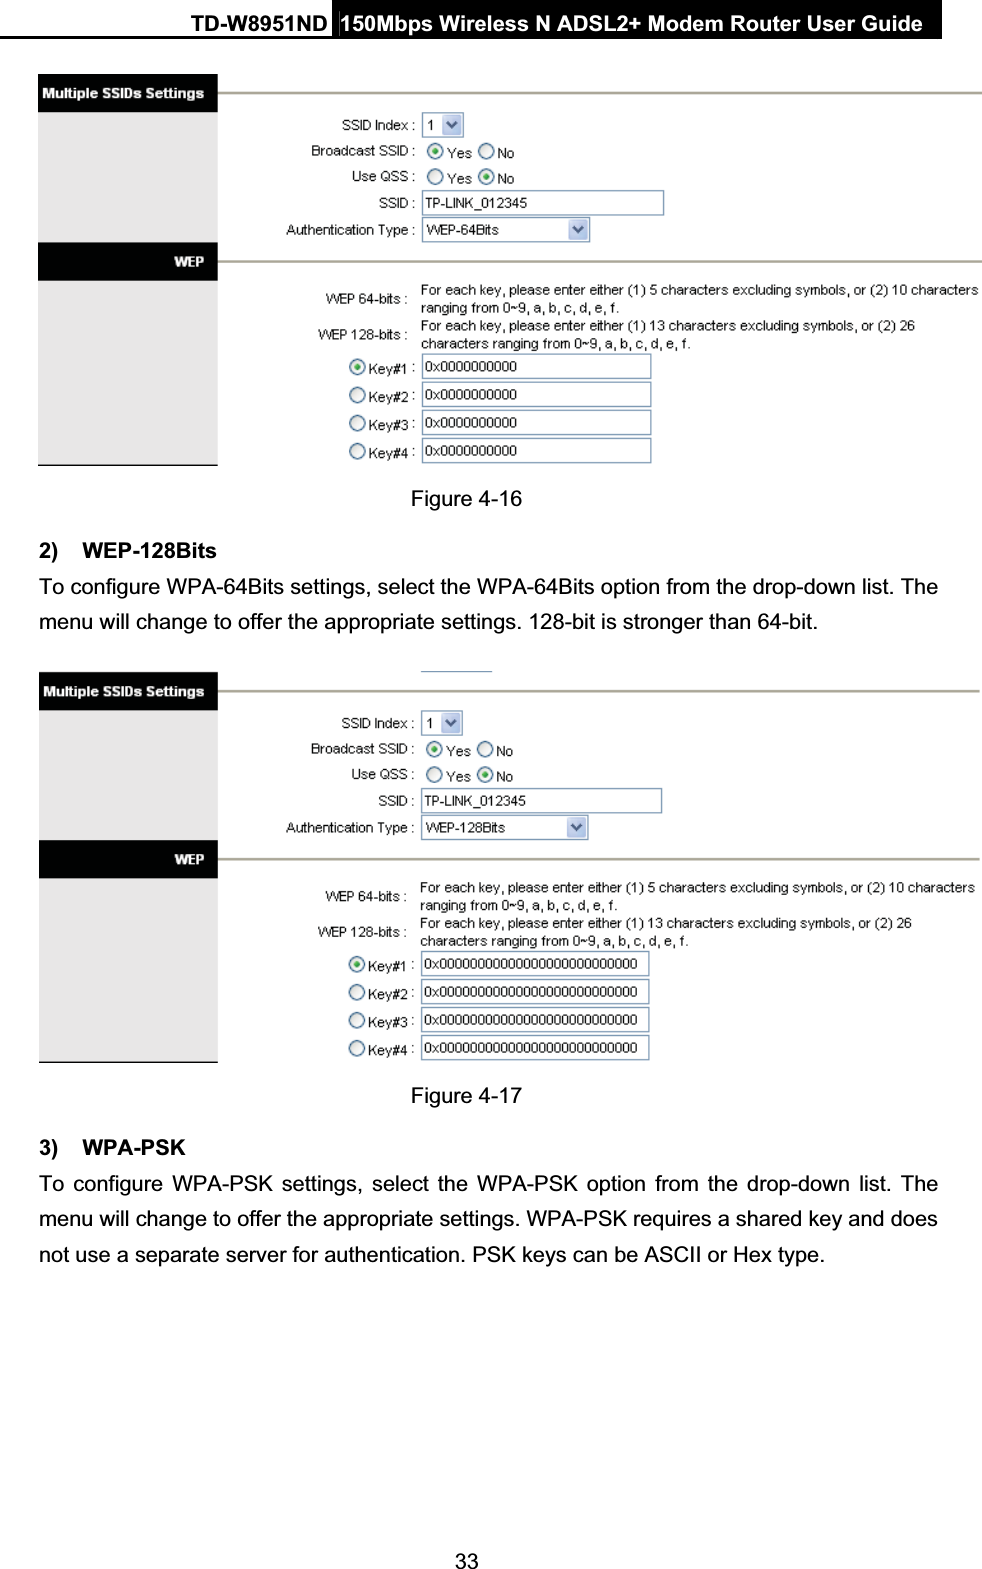 TD-W8951ND  150Mbps Wireless N ADSL2+ Modem Router User Guide33Figure 4-16 2) WEP-128Bits To configure WPA-64Bits settings, select the WPA-64Bits option from the drop-down list. The menu will change to offer the appropriate settings. 128-bit is stronger than 64-bit. Figure 4-17 3) WPA-PSK To configure WPA-PSK settings, select the WPA-PSK option from the drop-down list. The menu will change to offer the appropriate settings. WPA-PSK requires a shared key and does not use a separate server for authentication. PSK keys can be ASCII or Hex type. 